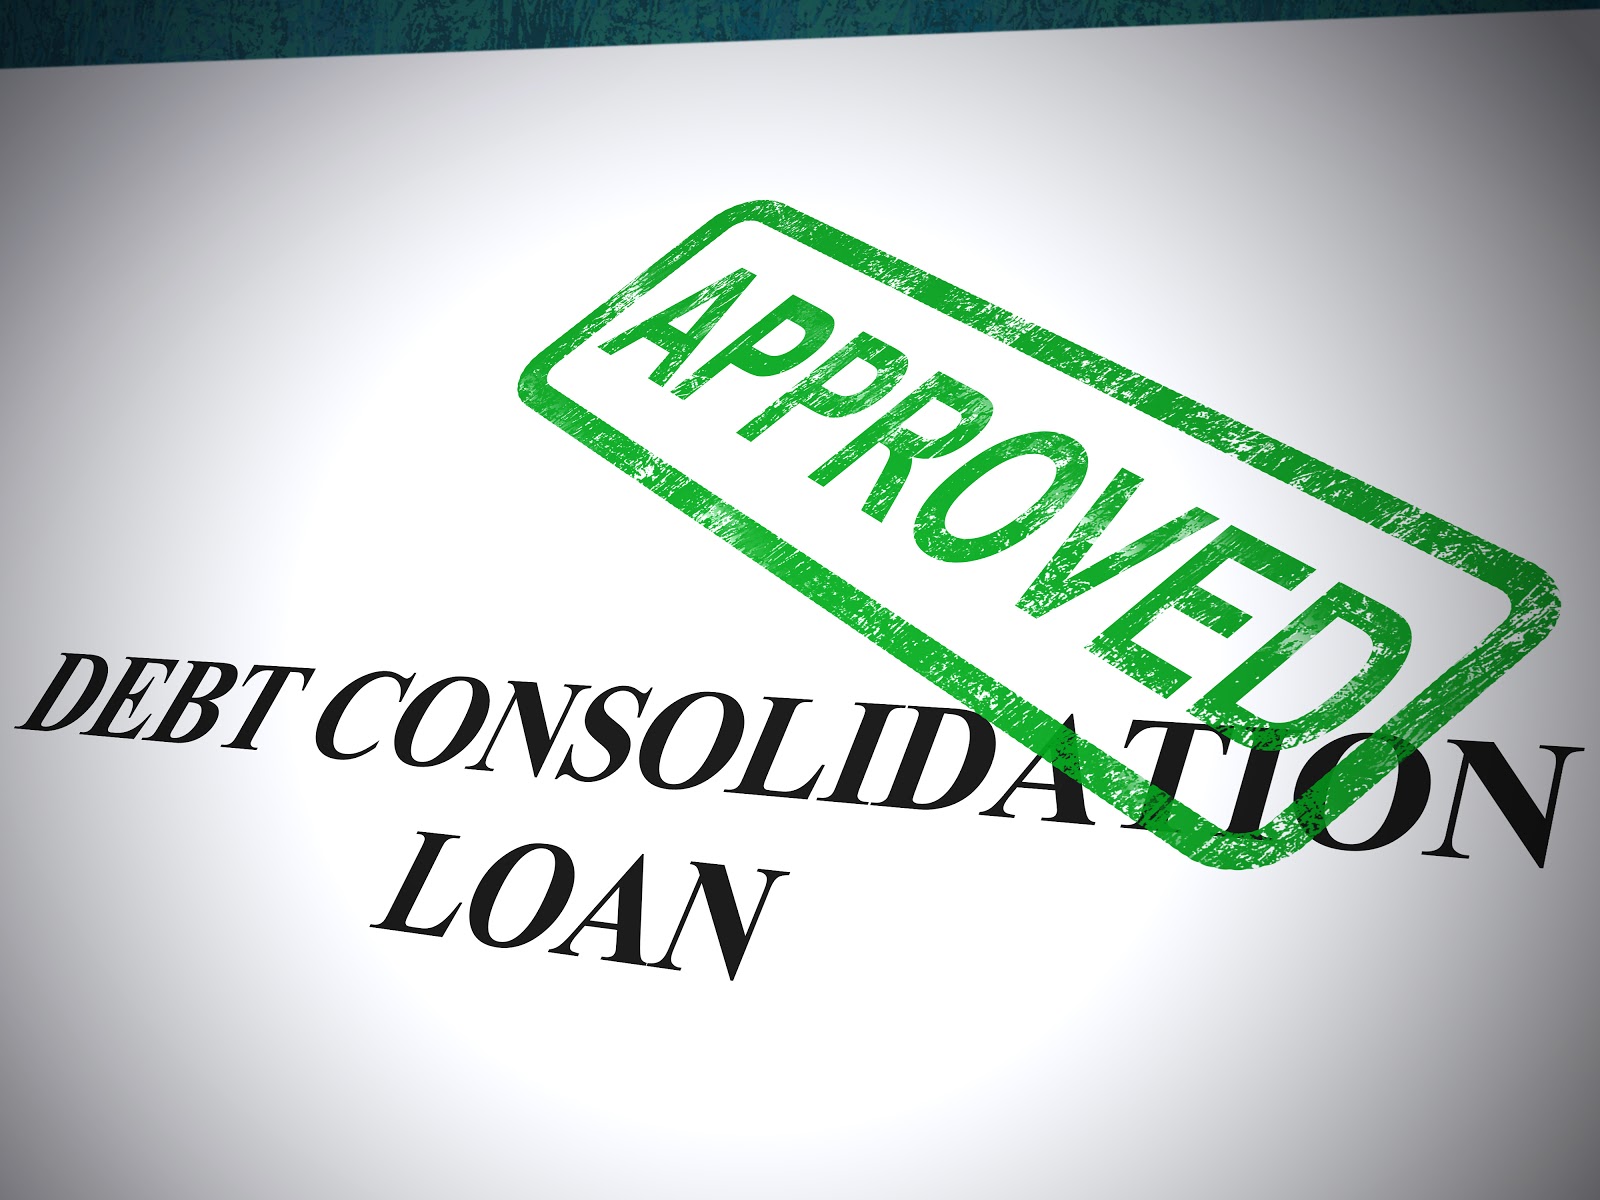 Debt consolidation loan eligibility